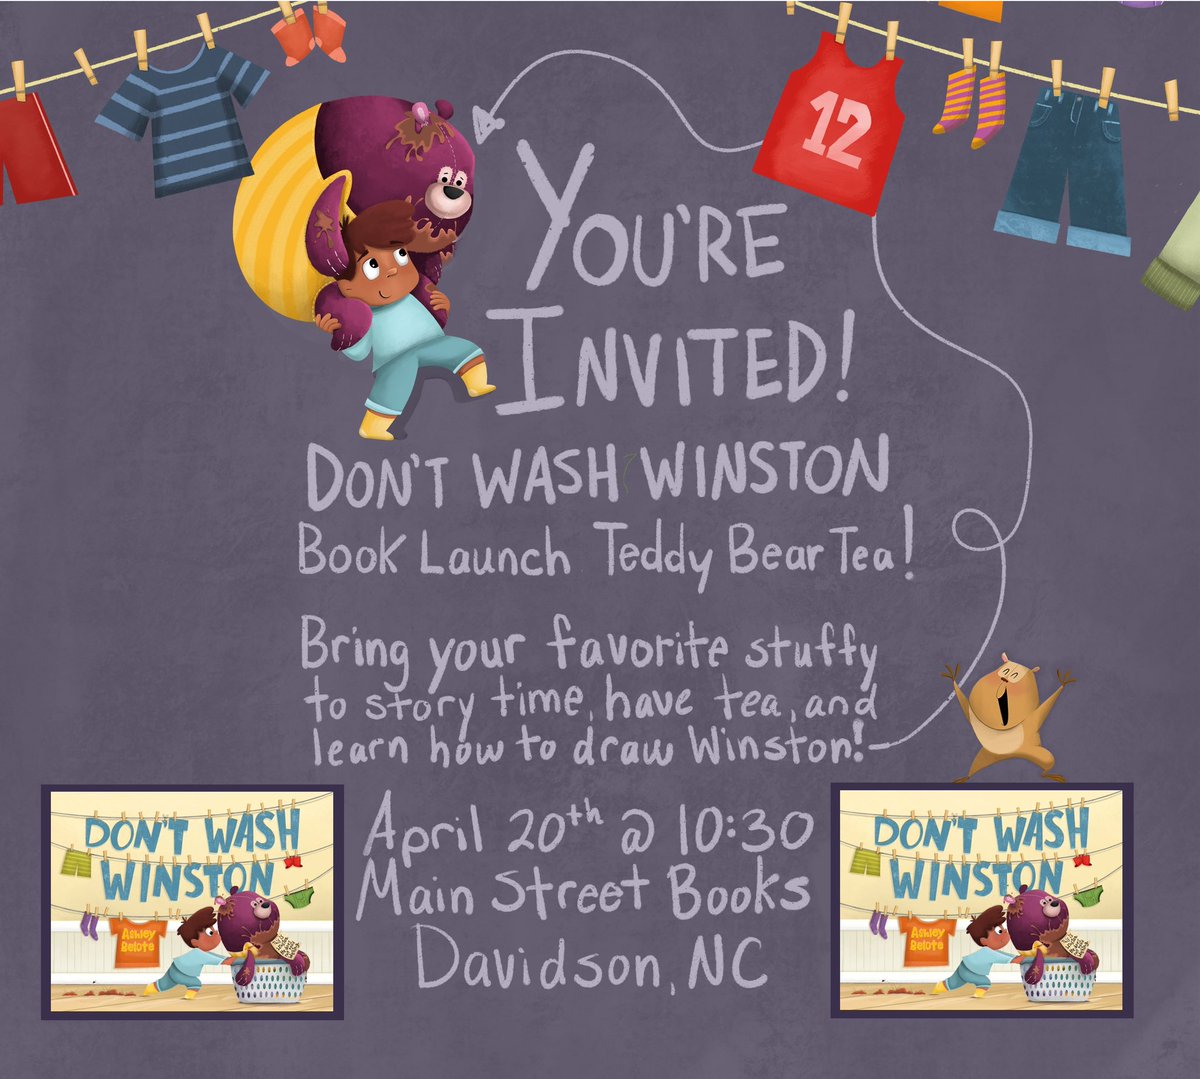 Hi everyone!! I just wanted to share the info for my book launch party this Saturday April 20th at Main Street Books -- Davidson, NC ! P.S There will be a teddy bear toss washing machine game 🚫💦🧸 can’t wait!! @MacKidsBooks @FeiwelFriends 🚫💦🧸